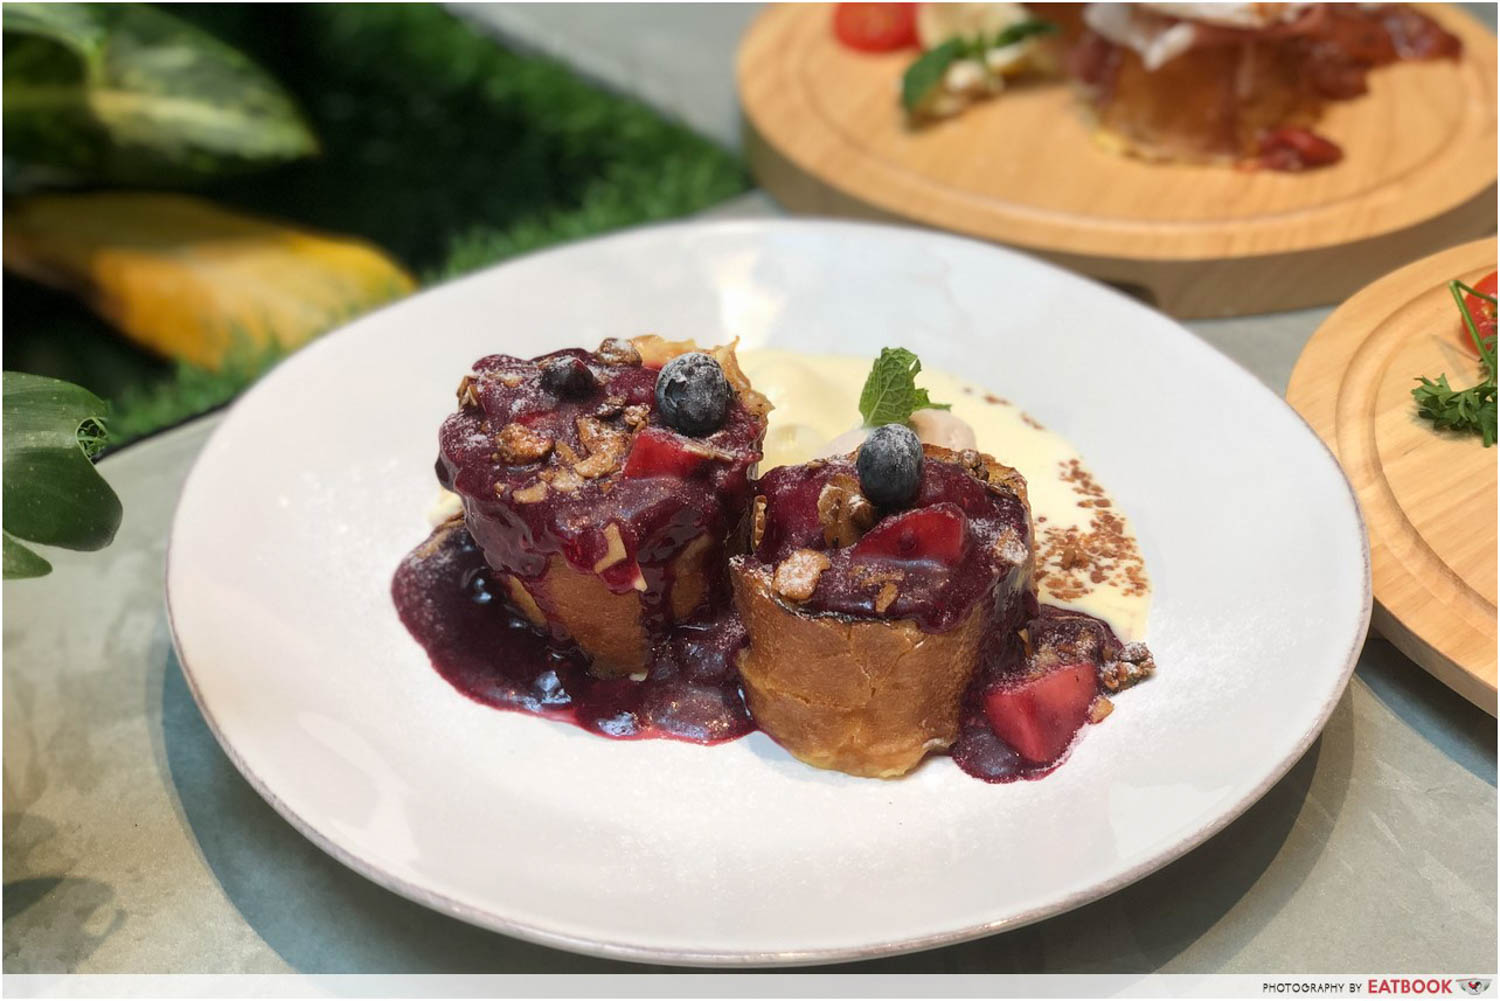 New Restaurant July - Mixed Berries French Toast